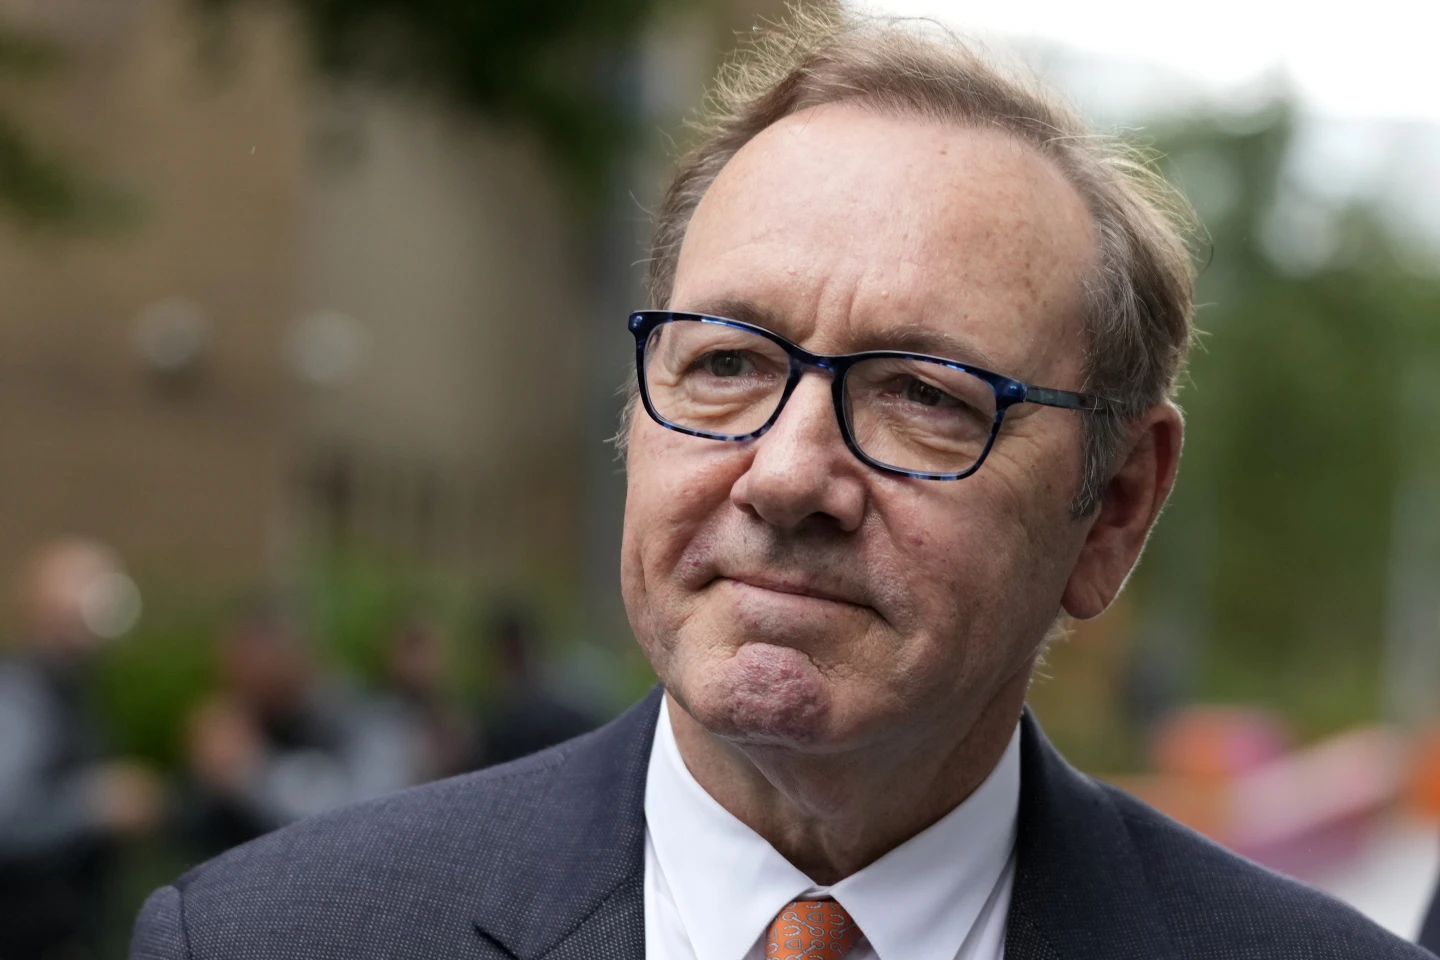 Actor Kevin Spacey found not guilty in sexual assault charges